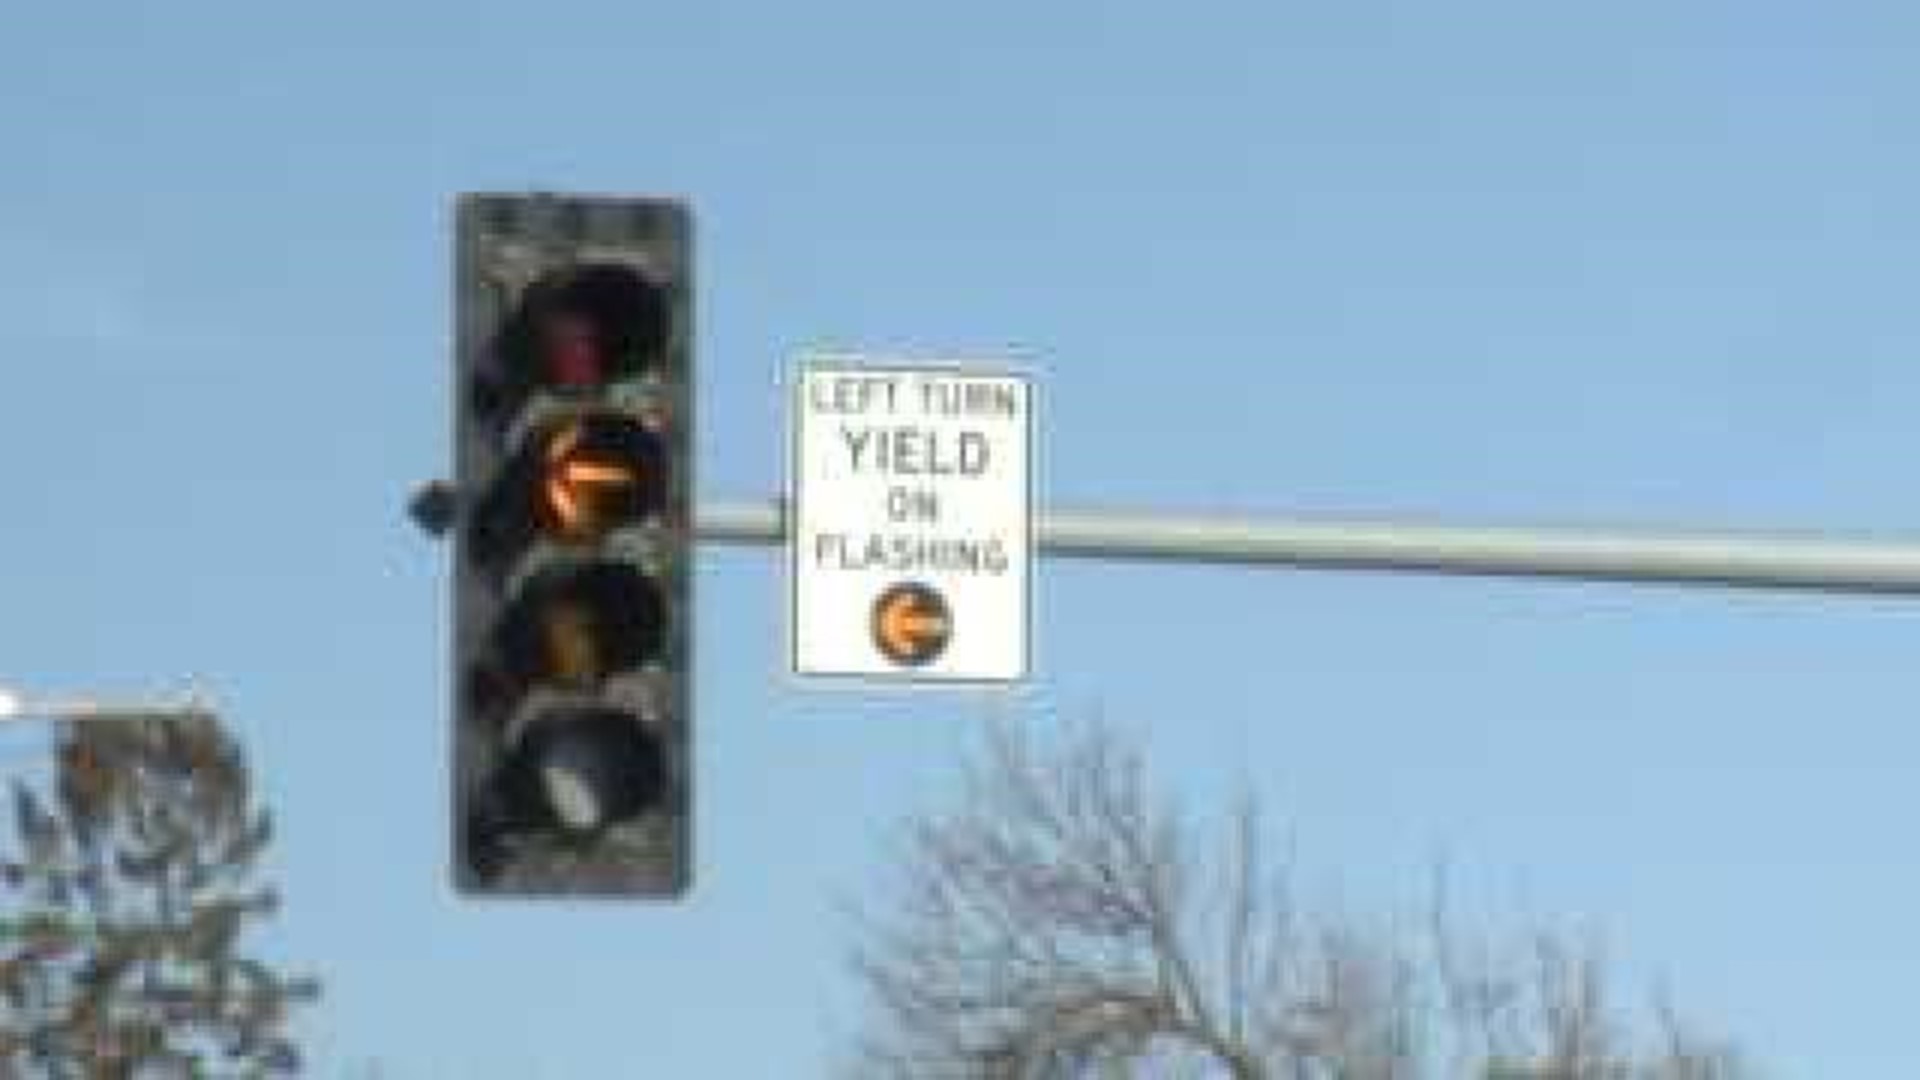 Galesburg intersections get flashing yellow arrows